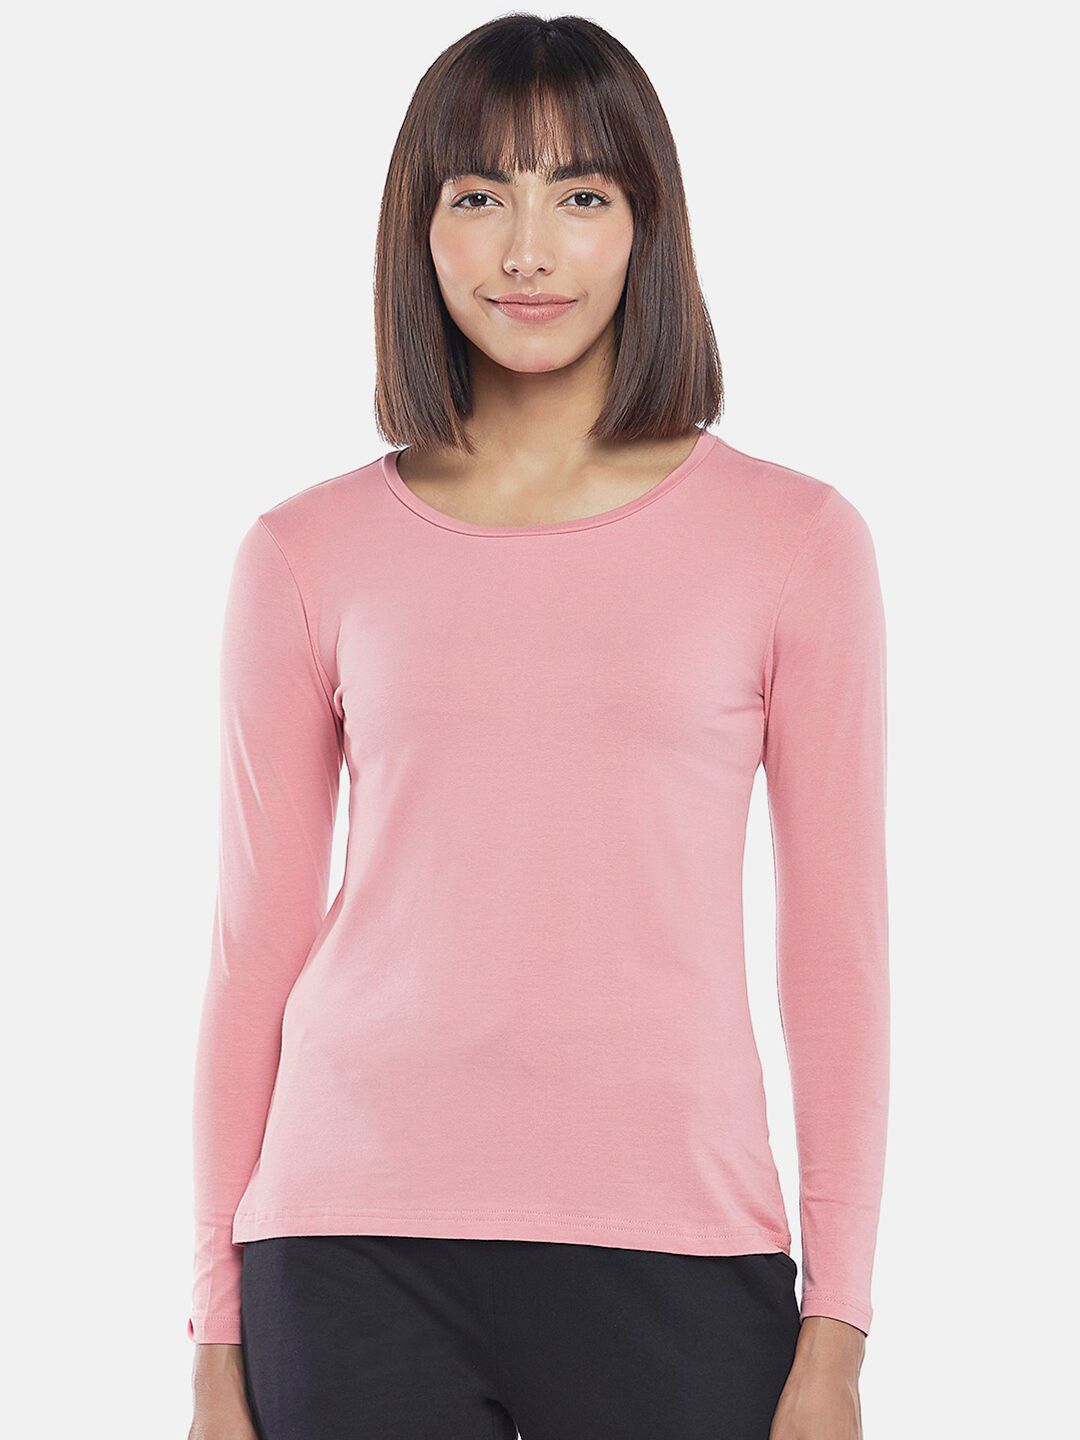 Dreamz by Pantaloons Pink Solid Lounge tshirt Price in India